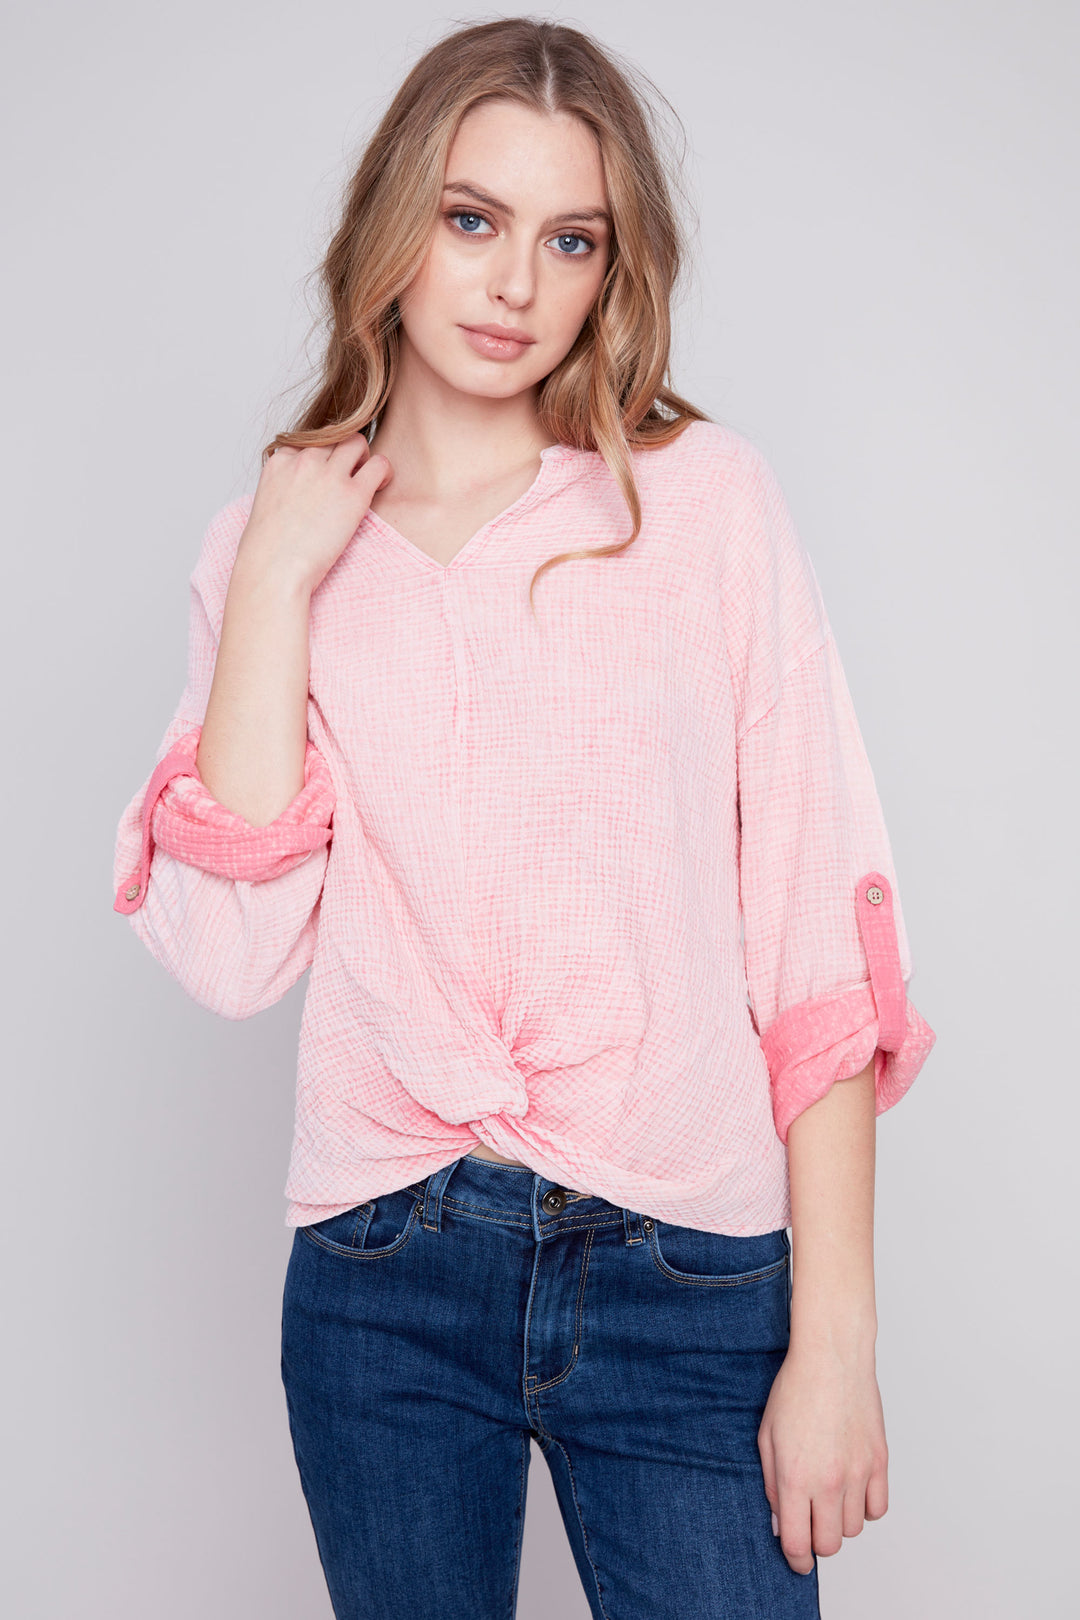 Made of all cotton, this sleek top features a neat tie knot at the hem and rolled sleeves for a washed out, laid-back look. 